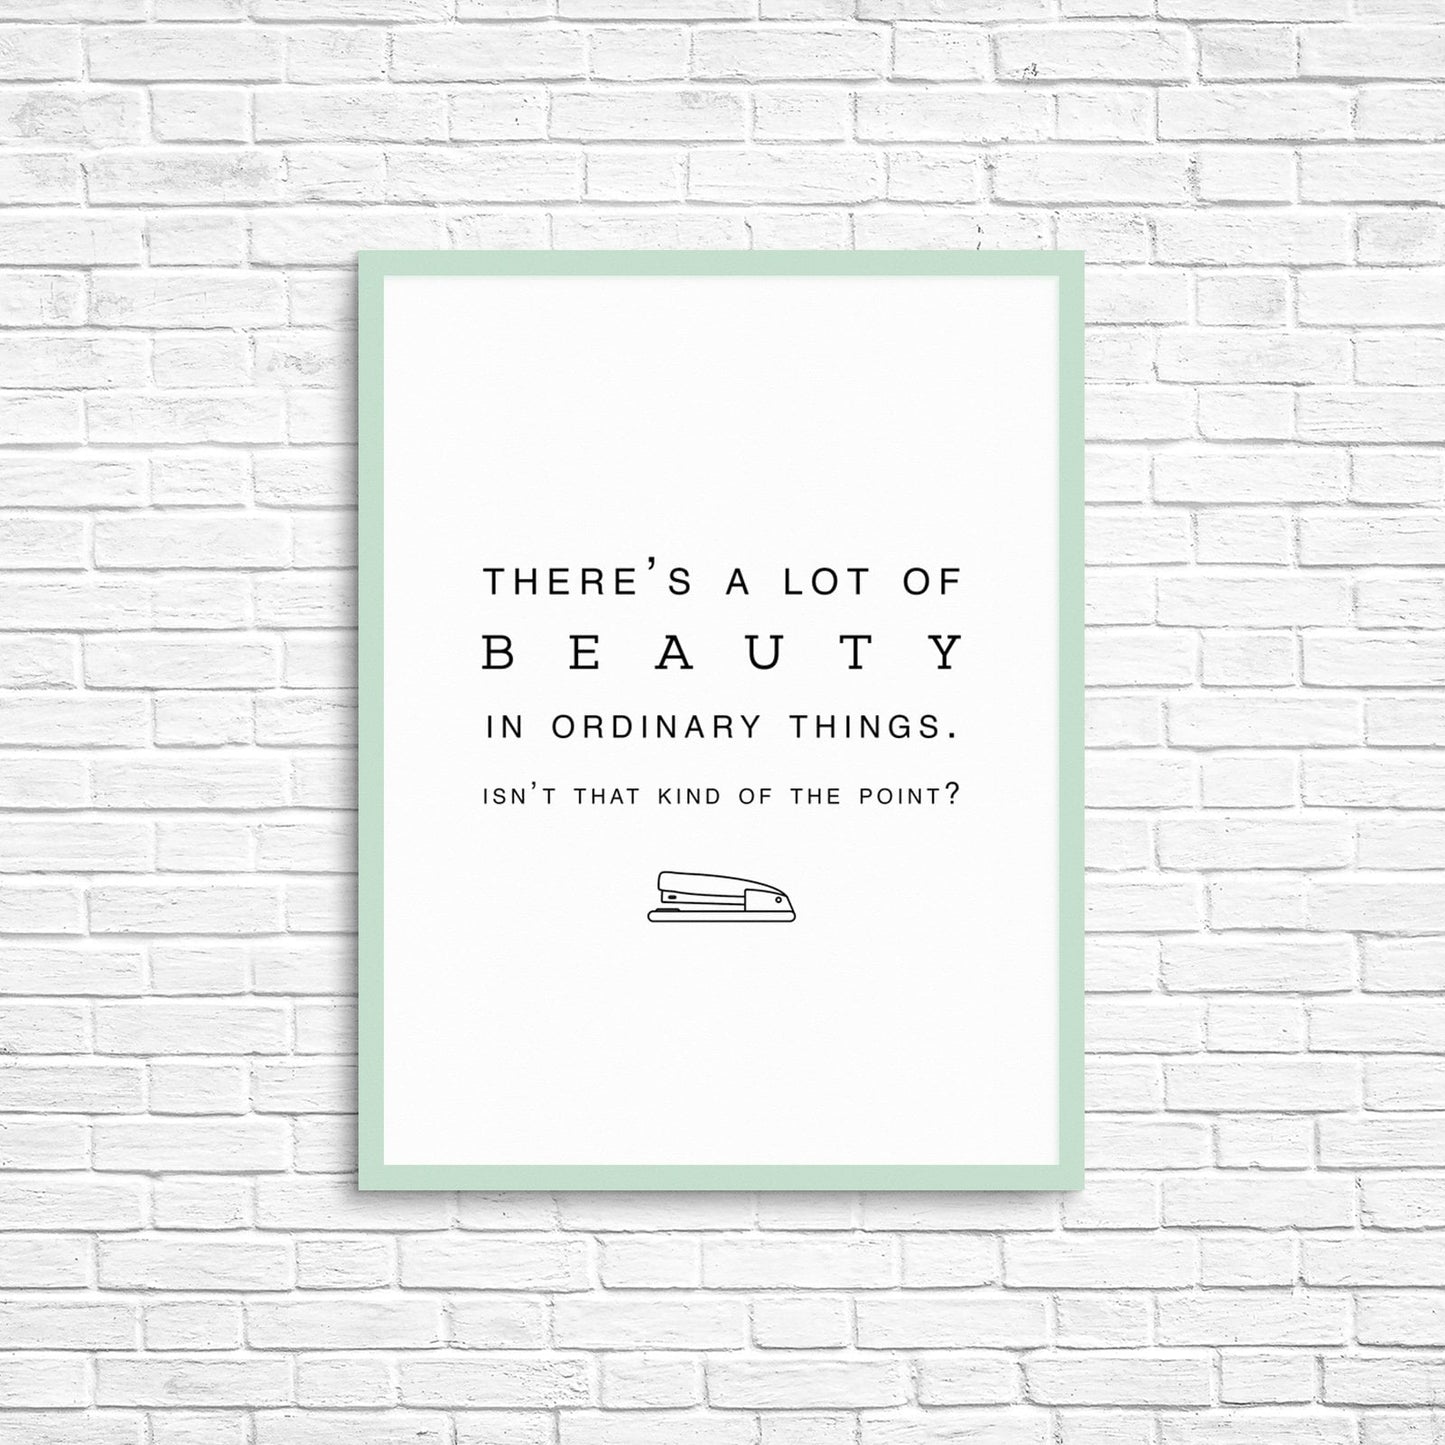 DIGITAL DOWNLOAD "There's a lot of beauty in ordinary things. Isn't that kind of the point?" - Pam Halpert, The Office Printable